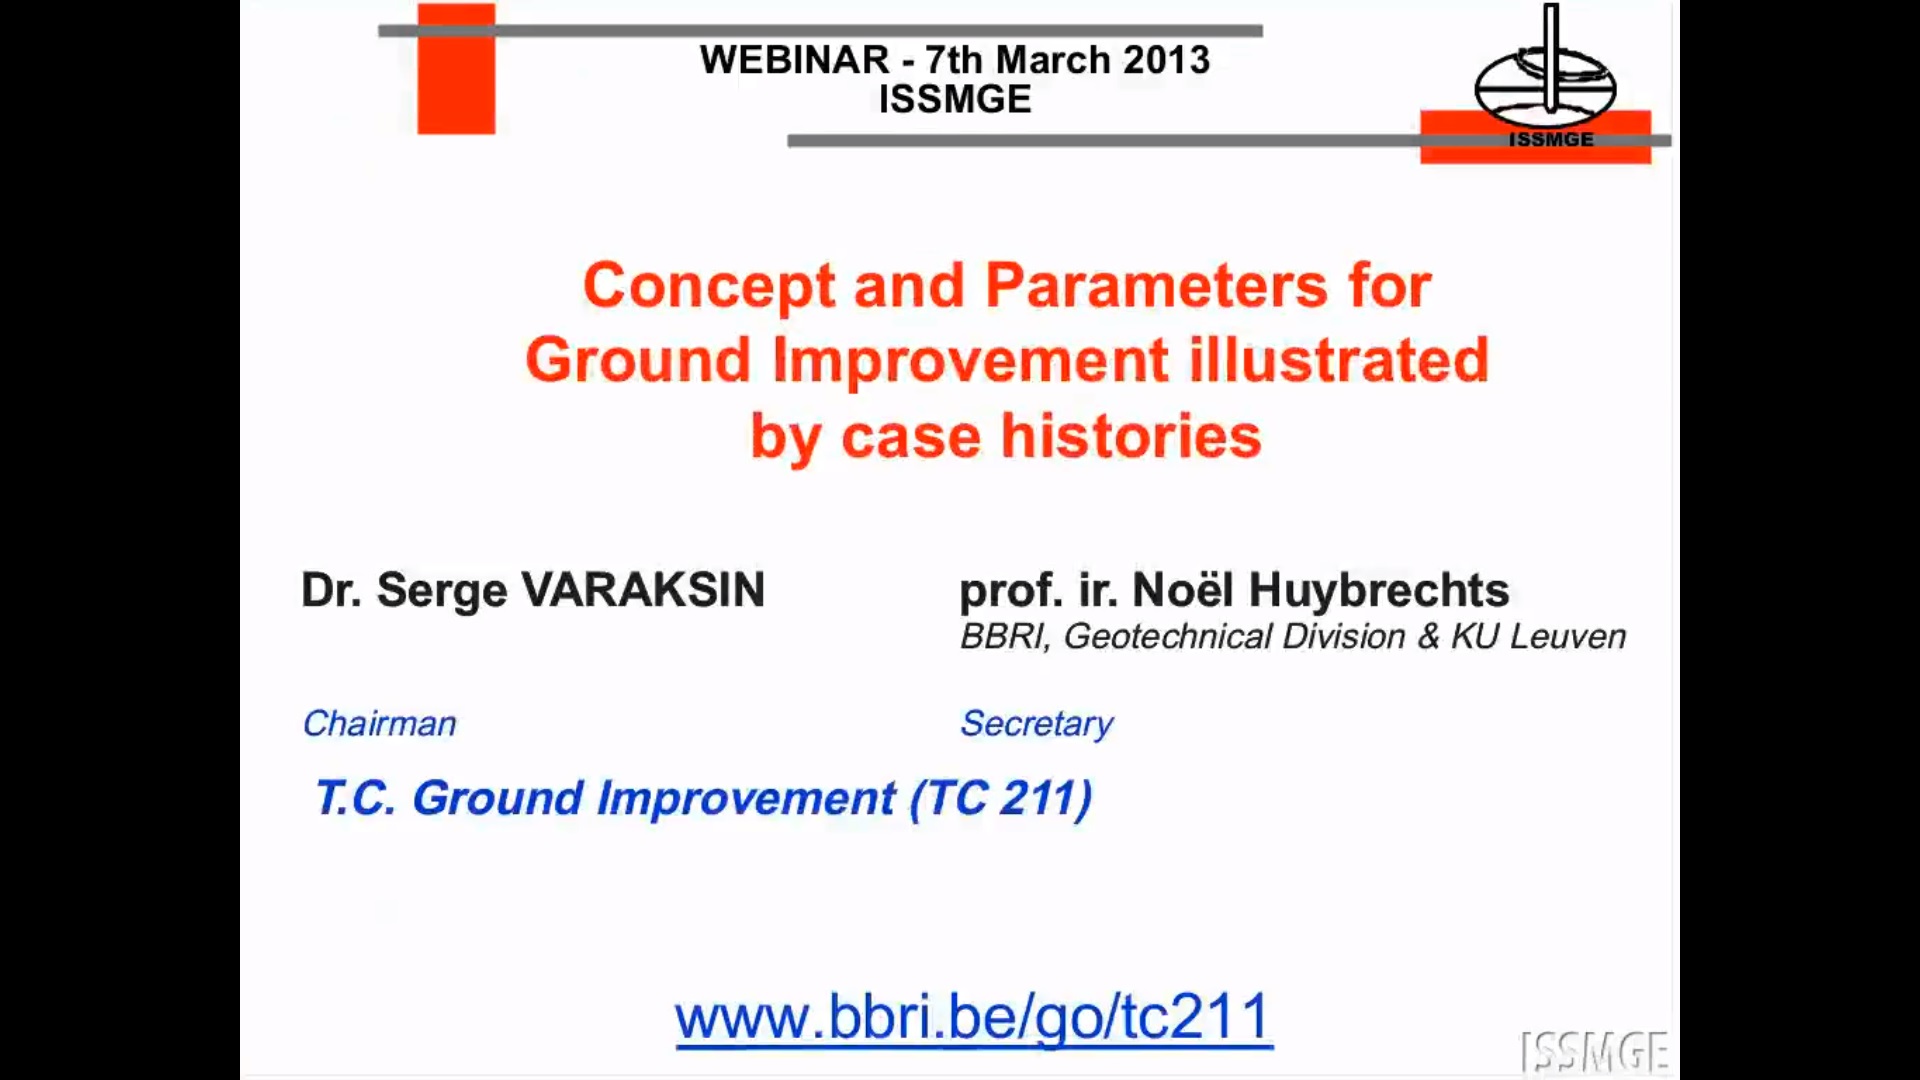 Concept and Parameters, Latest Research in Ground Improvement Illustrated by Related Case Histories {"category":"webinar","subjects":["Ground Improvement"],"number":"VU-GI","instructors":["Serge Varaksin","Noel Huybrechts"]}